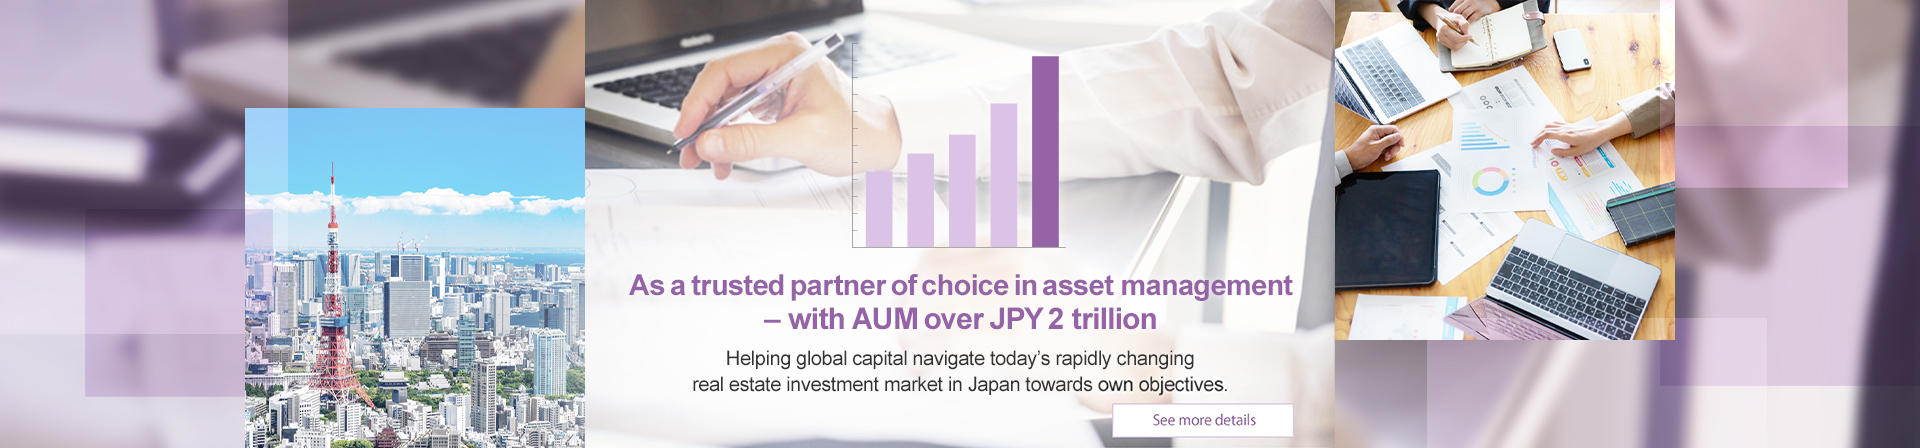 As a trusted partner of choice in asset management – with AUM over JPY 2 trillion